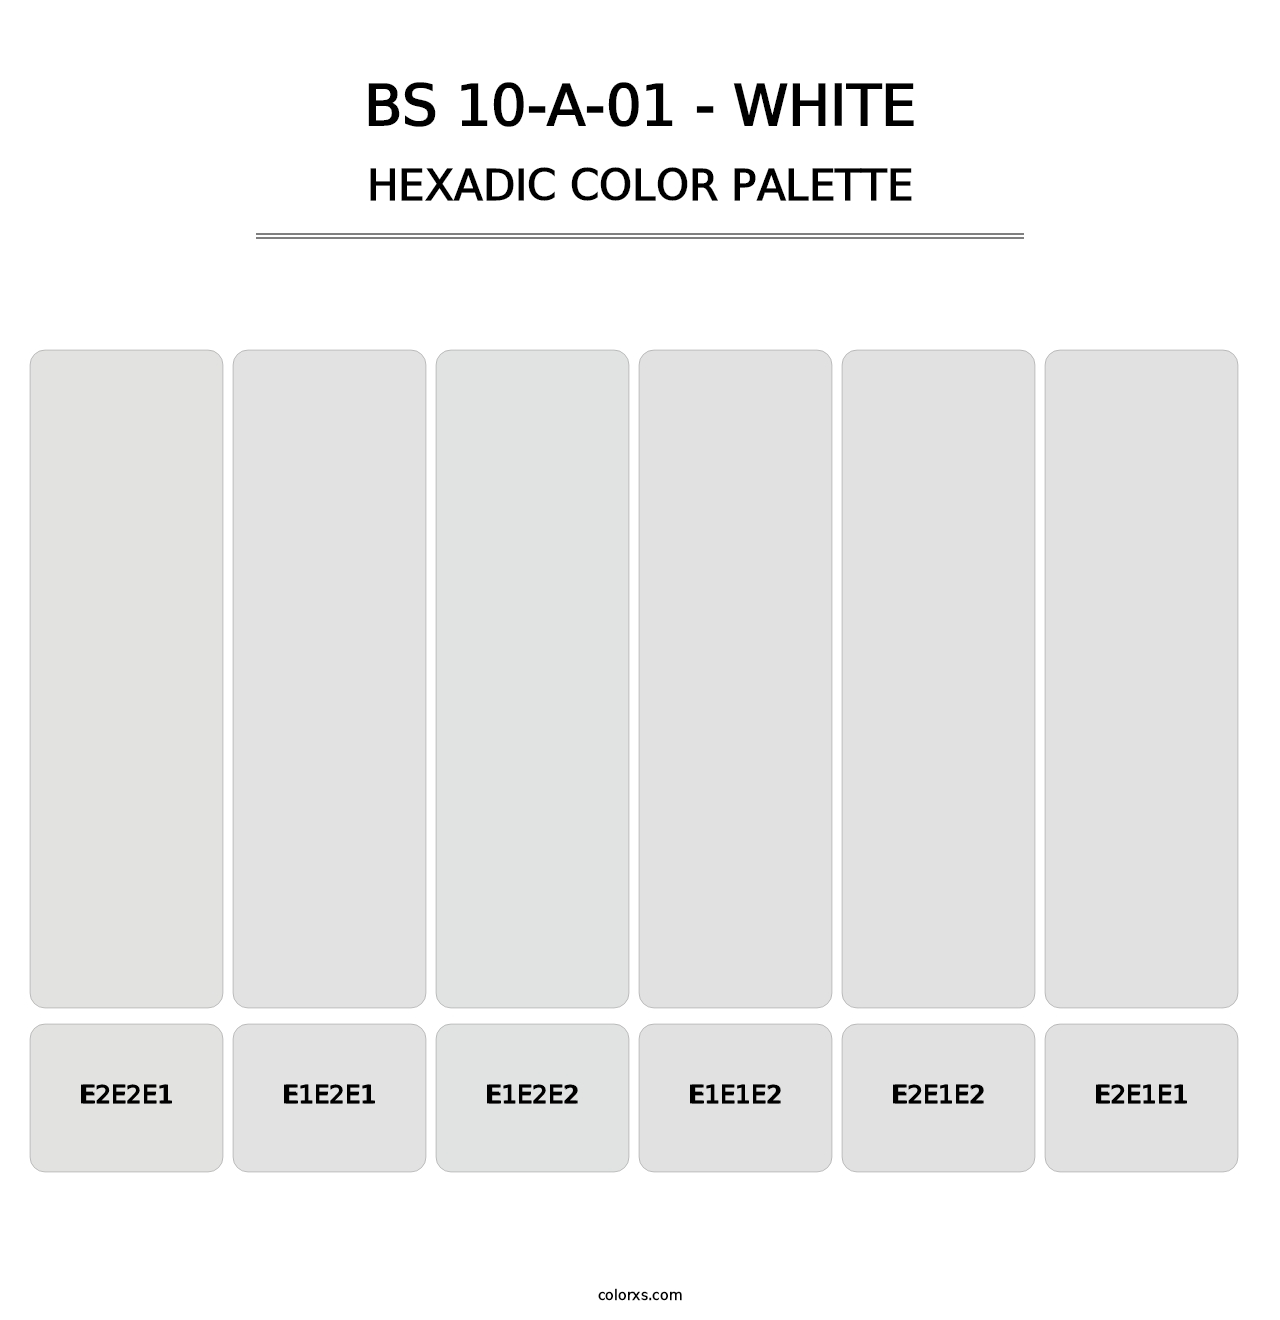 BS 10-A-01 - White - Hexadic Color Palette